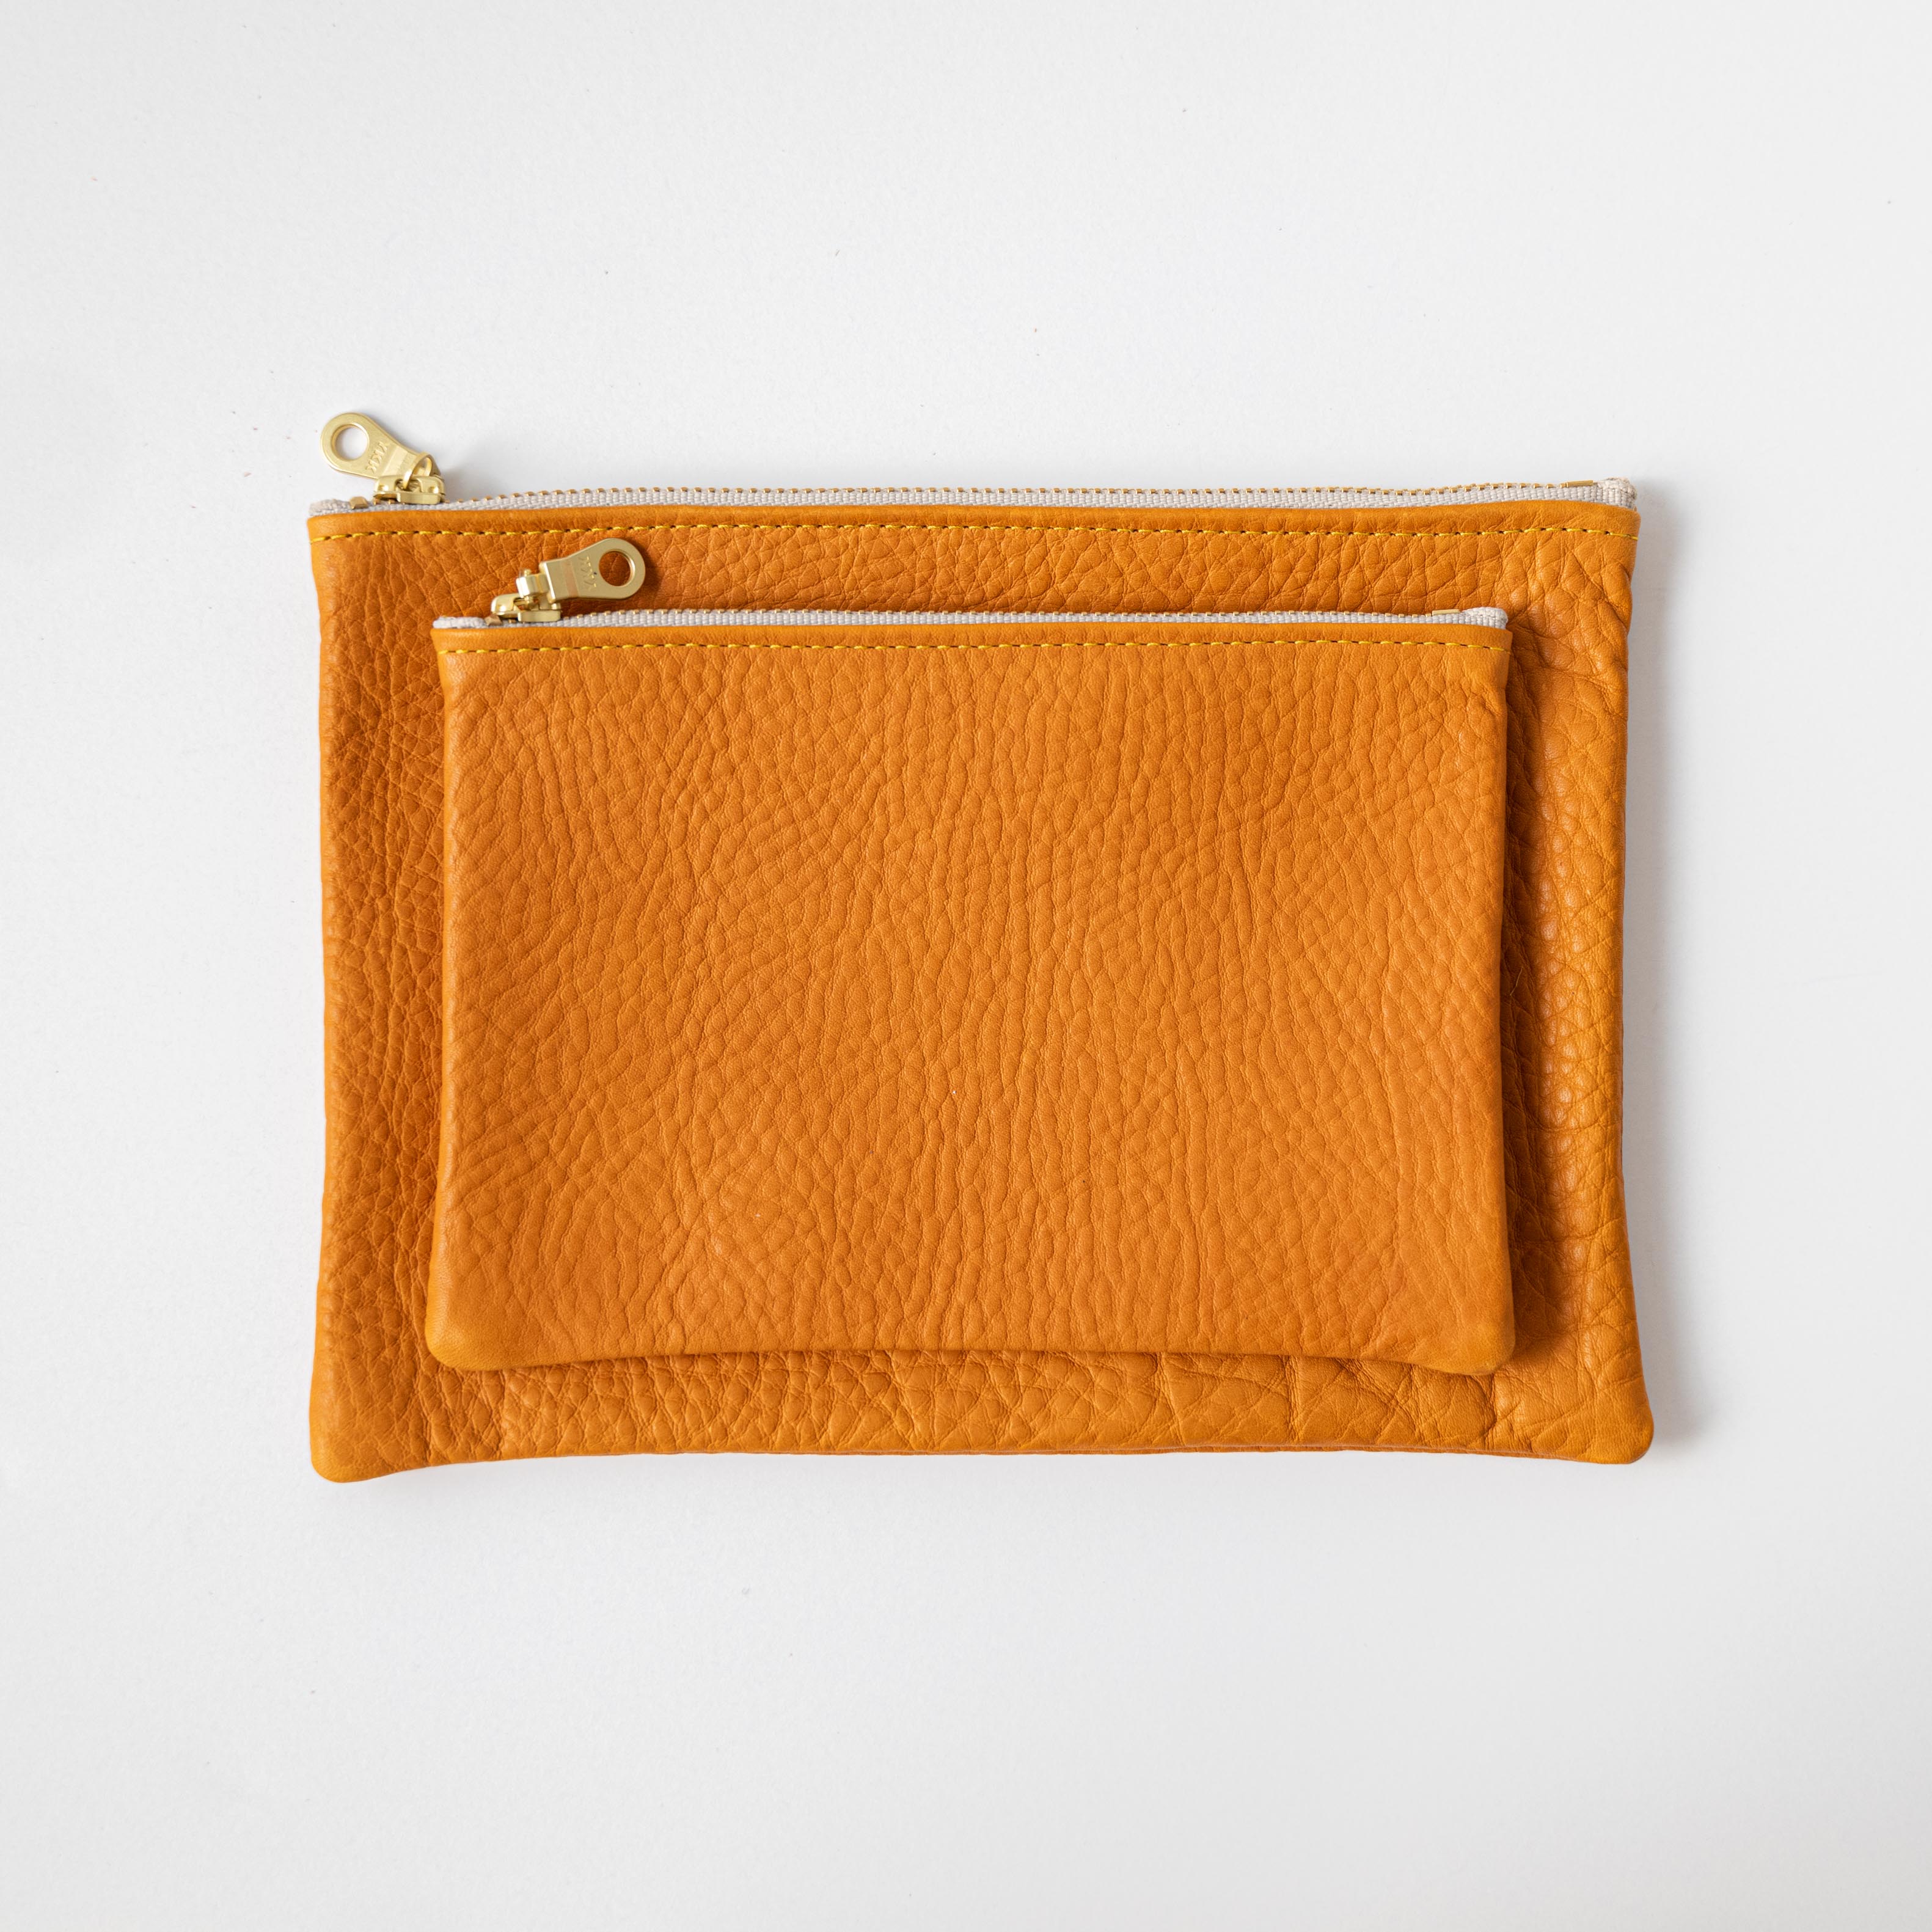 Marc Jacobs Small Snapshot Camera Bag Purse - New Orange and Cream -  Pioneer Recycling Services